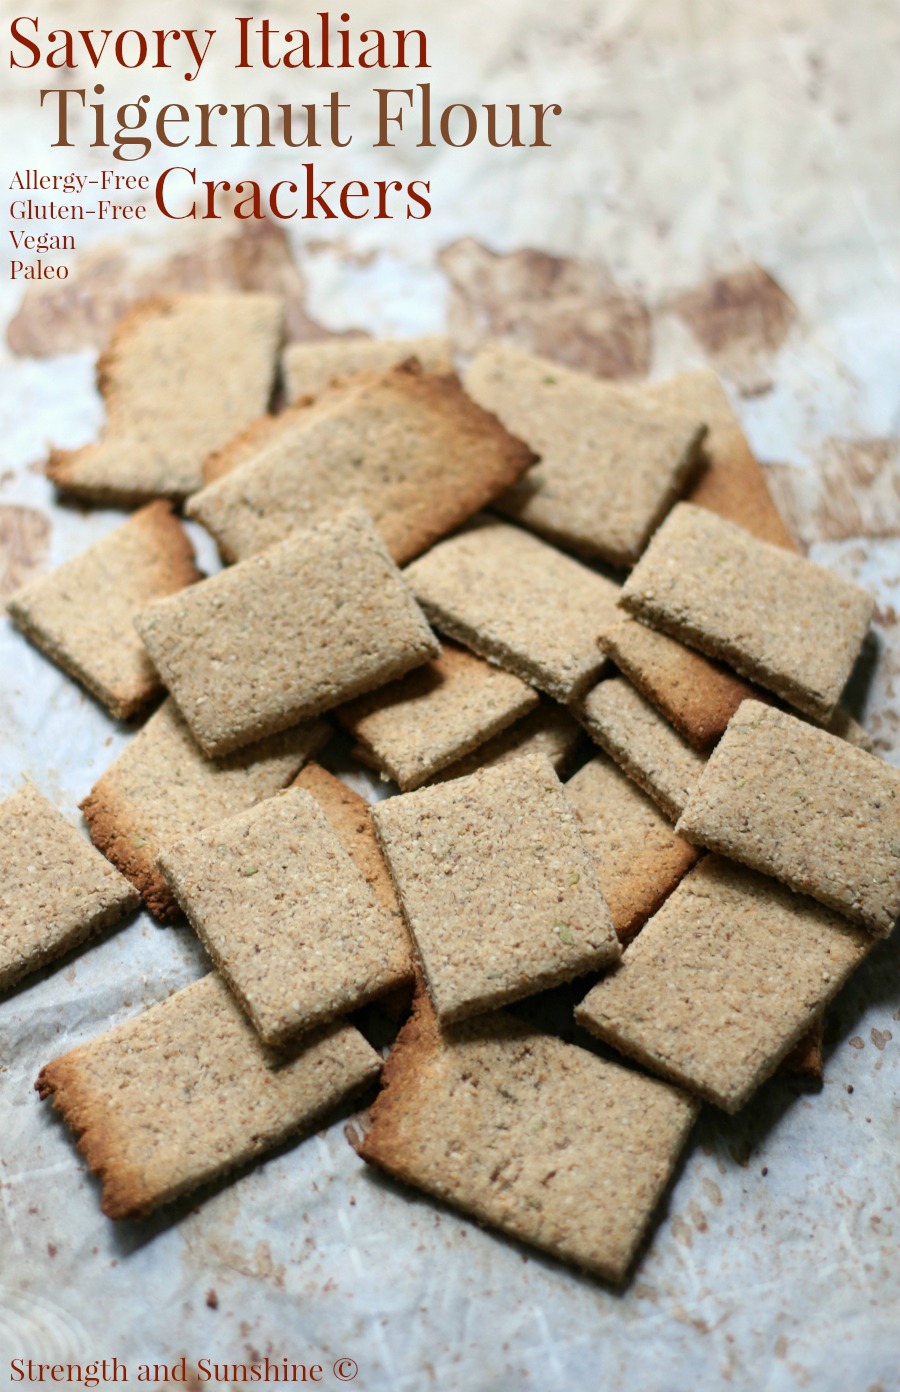 Savory Italian Tigernut Flour Crackers (Gluten-Free, Vegan, Paleo) | Strength and Sunshine @RebeccaGF666 A healthy and delicious grain-free snack! Savory Italian Tigernut Flour Crackers, easy and homemade, baked in the oven, and gluten-free, vegan, paleo, and allergy-free! They are perfect for an everyday snack or a fancy addition to an appetizer platter!